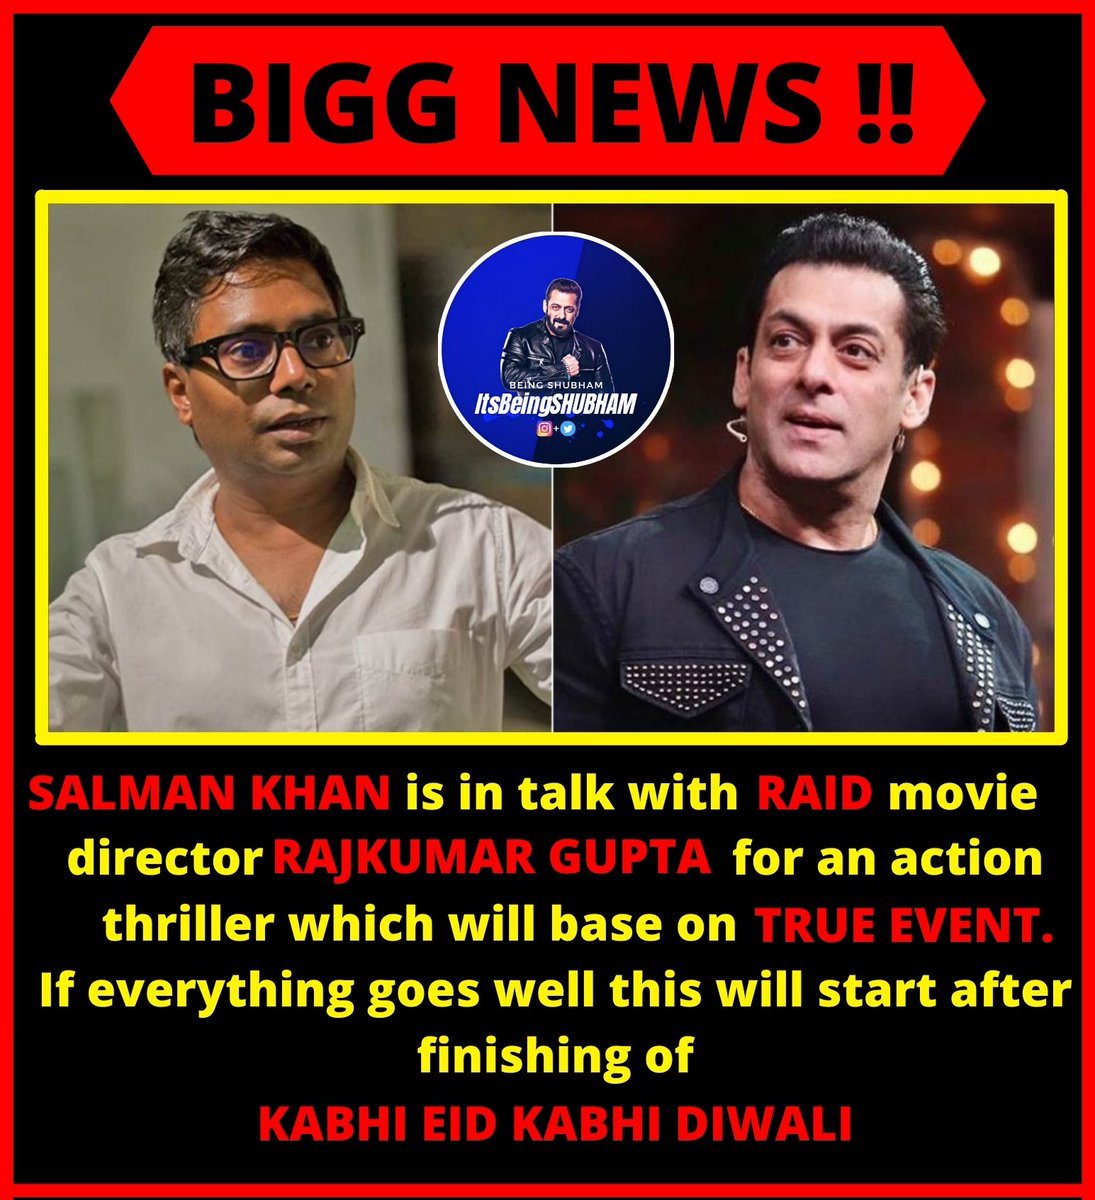 #BIGNEWS 
#SalmanKhan is in talk with ‘RAID’ director #RajkumarGupta for Action Thriller based on TRUE EVENTS...

If all goes well , it will be actor's next after #KEKD 💯🤞🏼